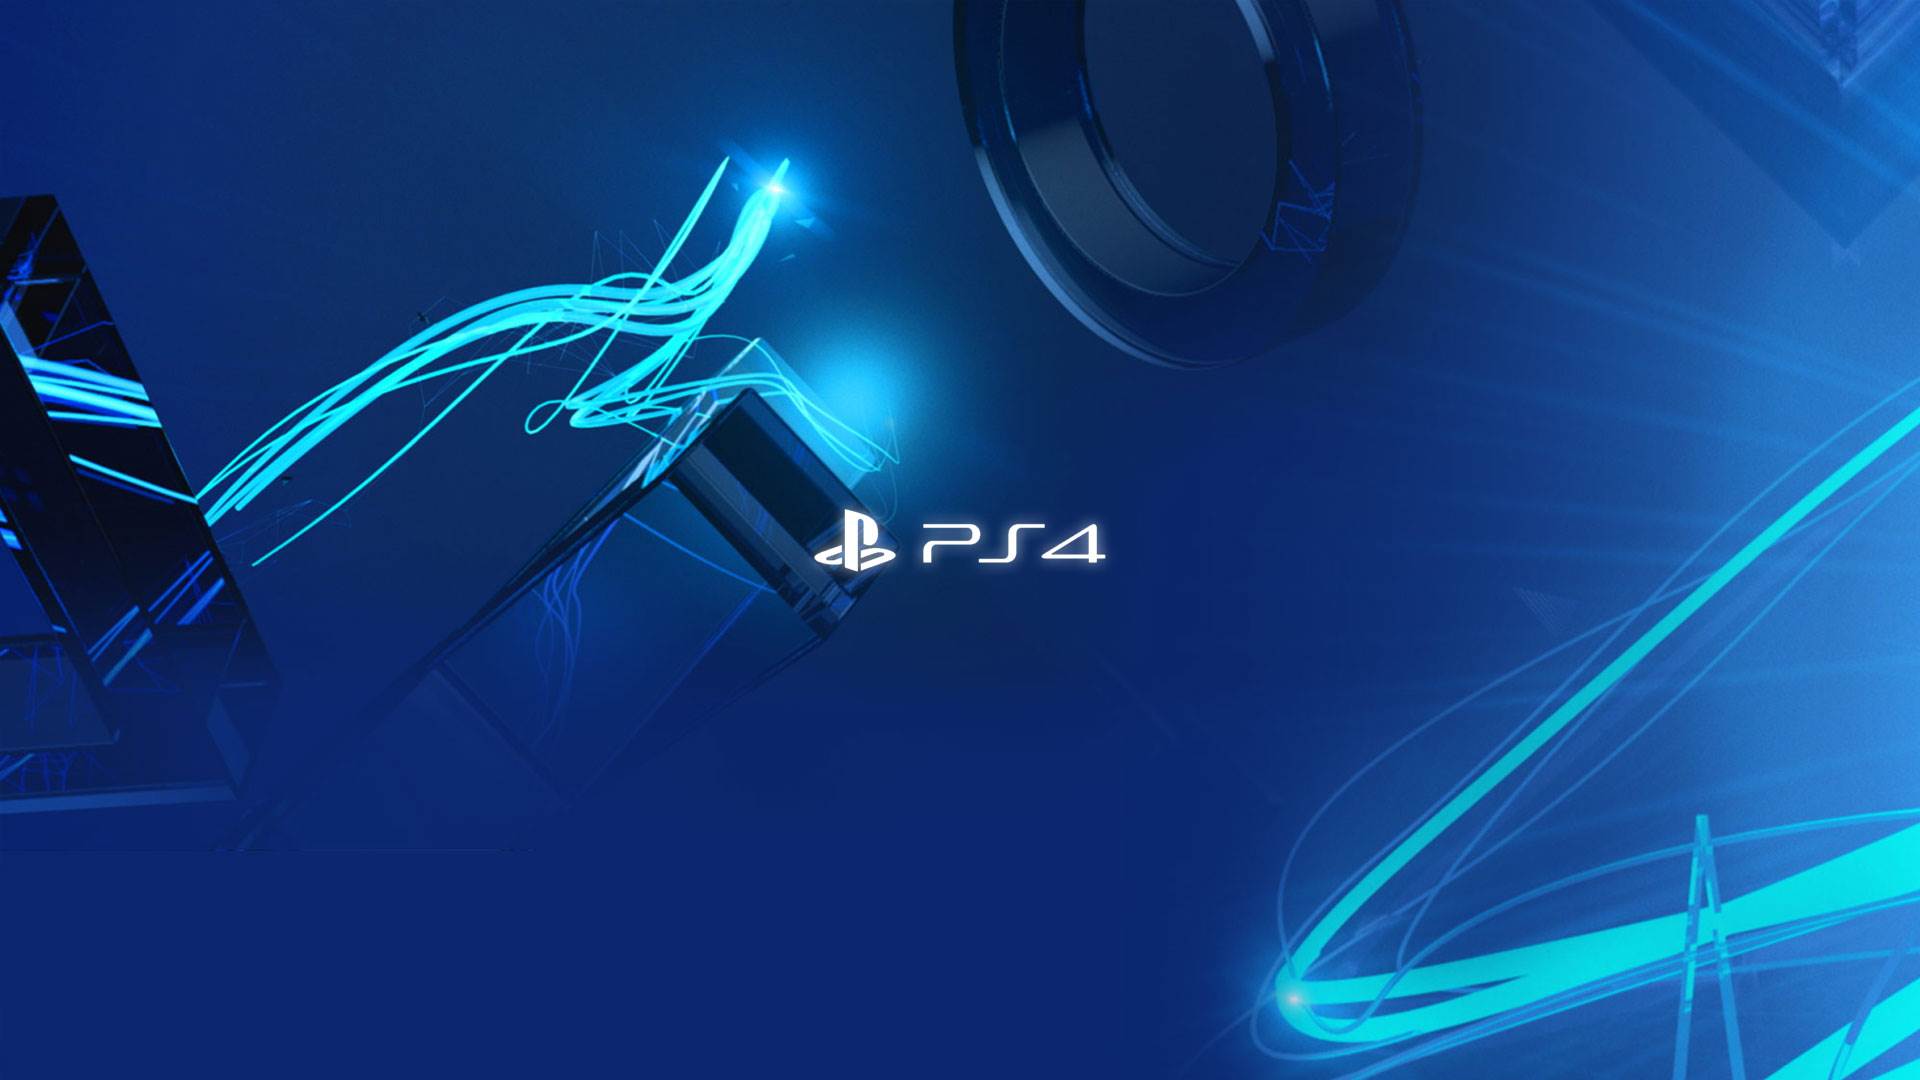 PS4 Wallpaper Free 1920x1080 PS4 Background